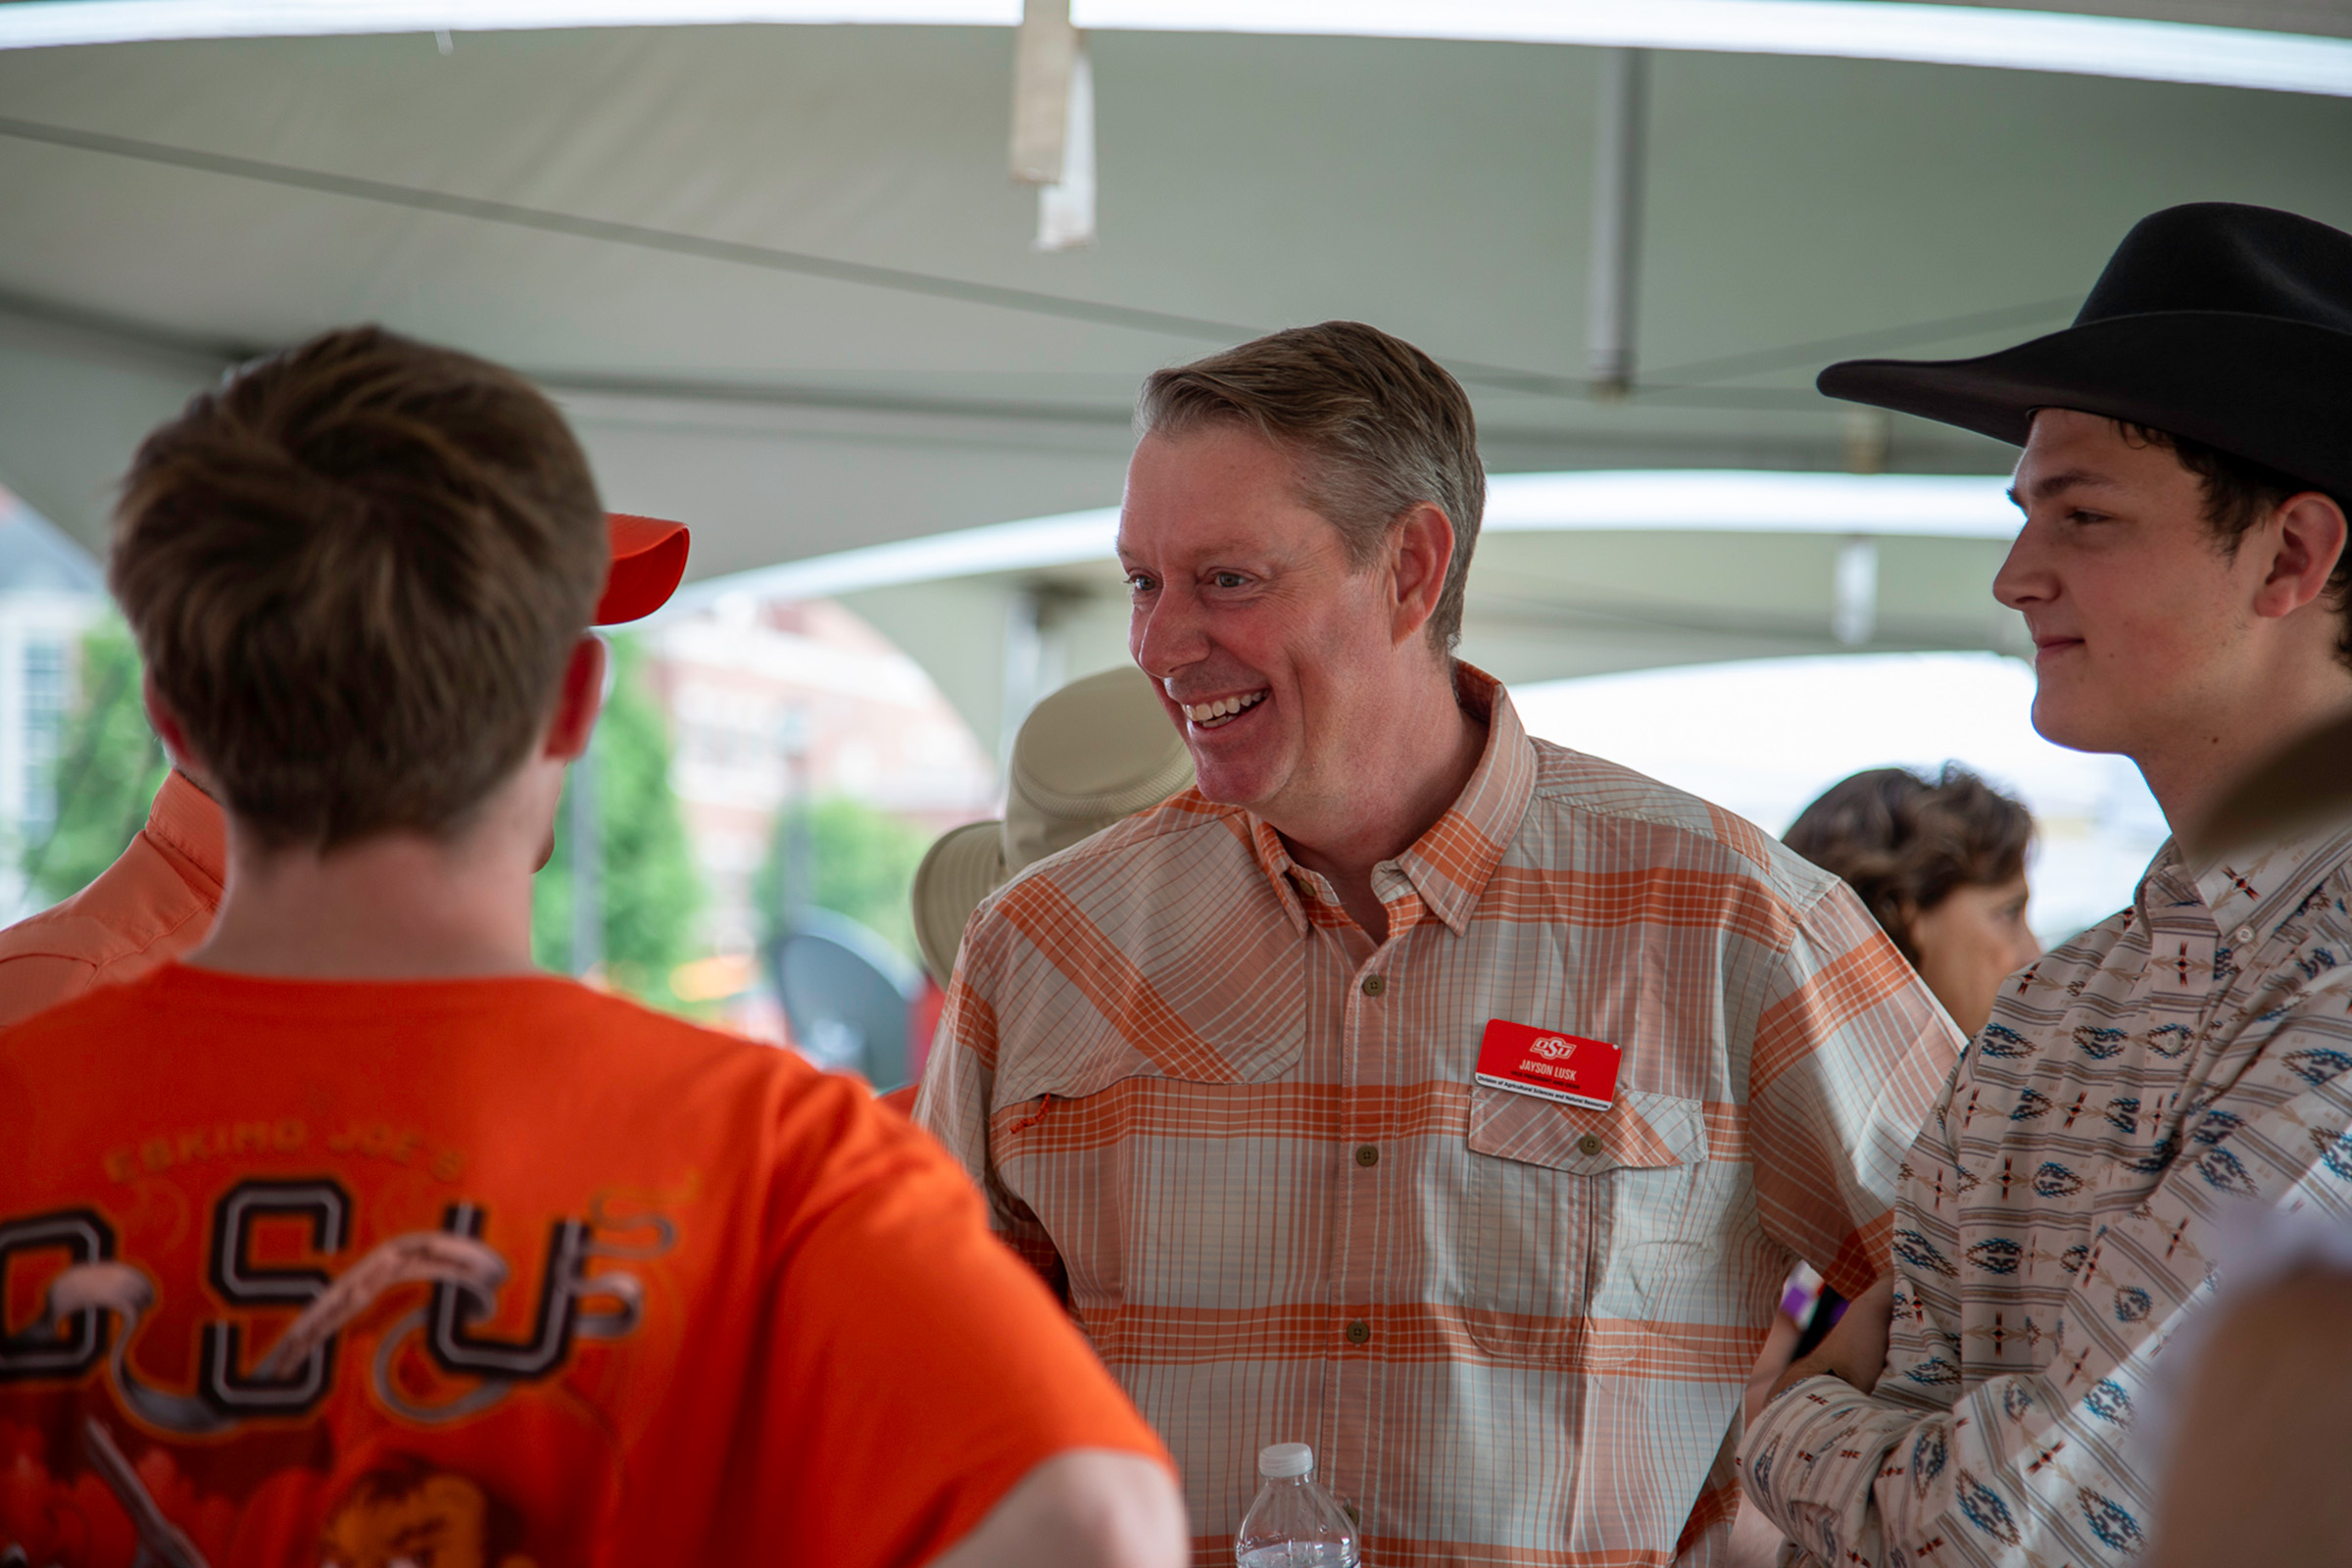 Jayson Lusk, vice president and dean of Oklahoma State University Agriculture, meets and greets New Frontiers donors and Ferguson College of Agriculture friends and alumni during the New Frontiers Tailgate. (Photo by Bryanna Birdsong, OSU Foundation.)